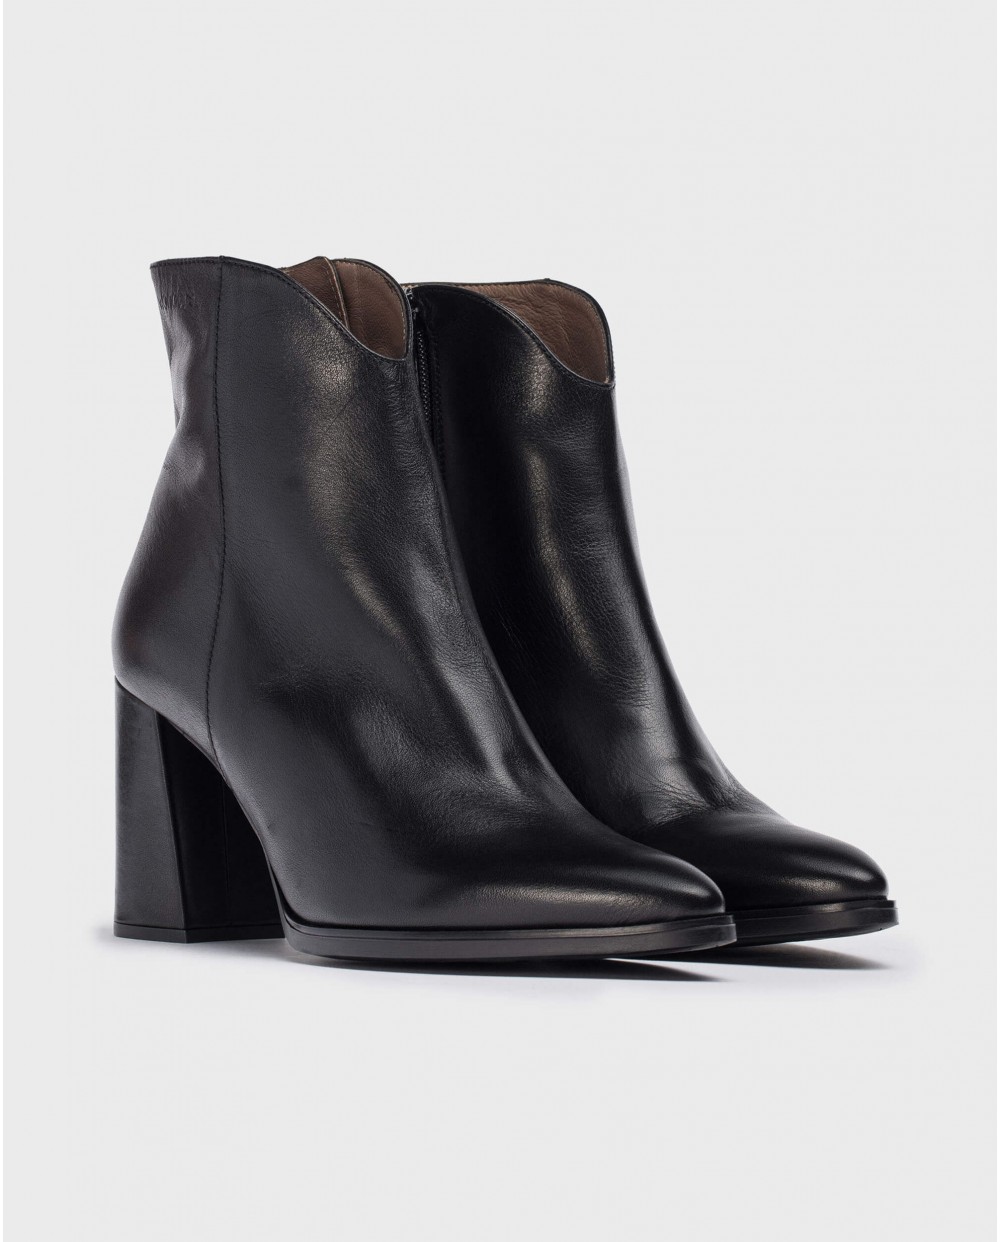 Wonders-Ankle Boots-Black NARA ankle boot